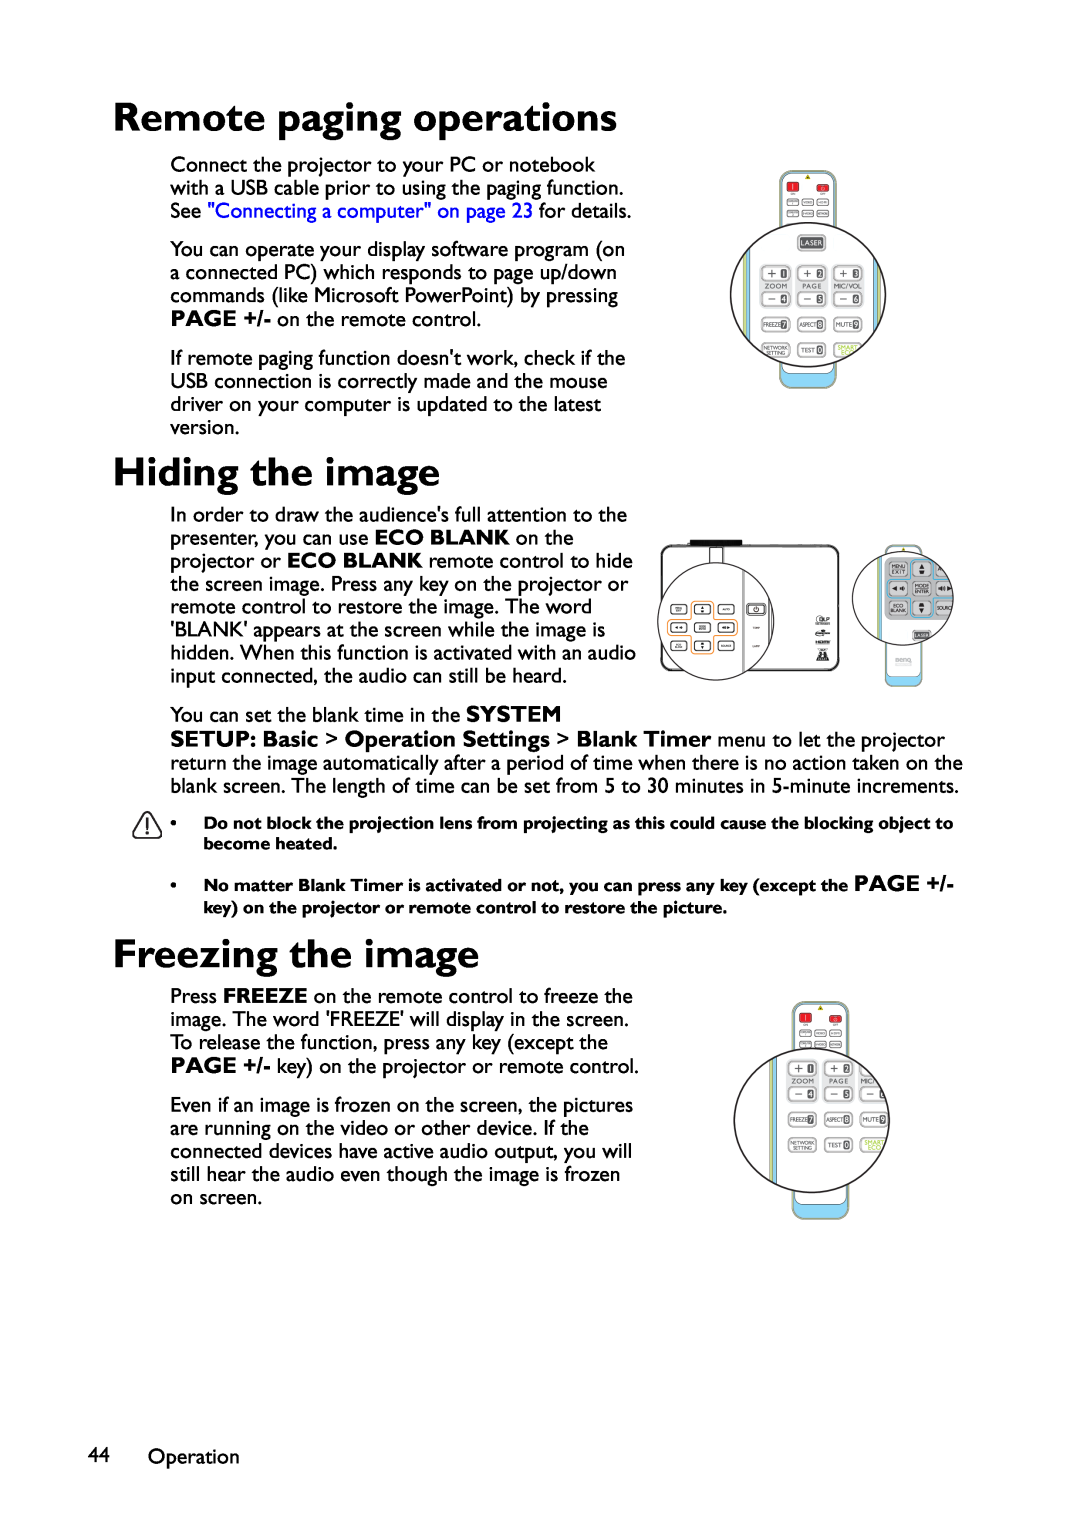 BenQ MX822ST, MX766, MW767 user manual Remote paging operations, Hiding the image, Freezing the image 